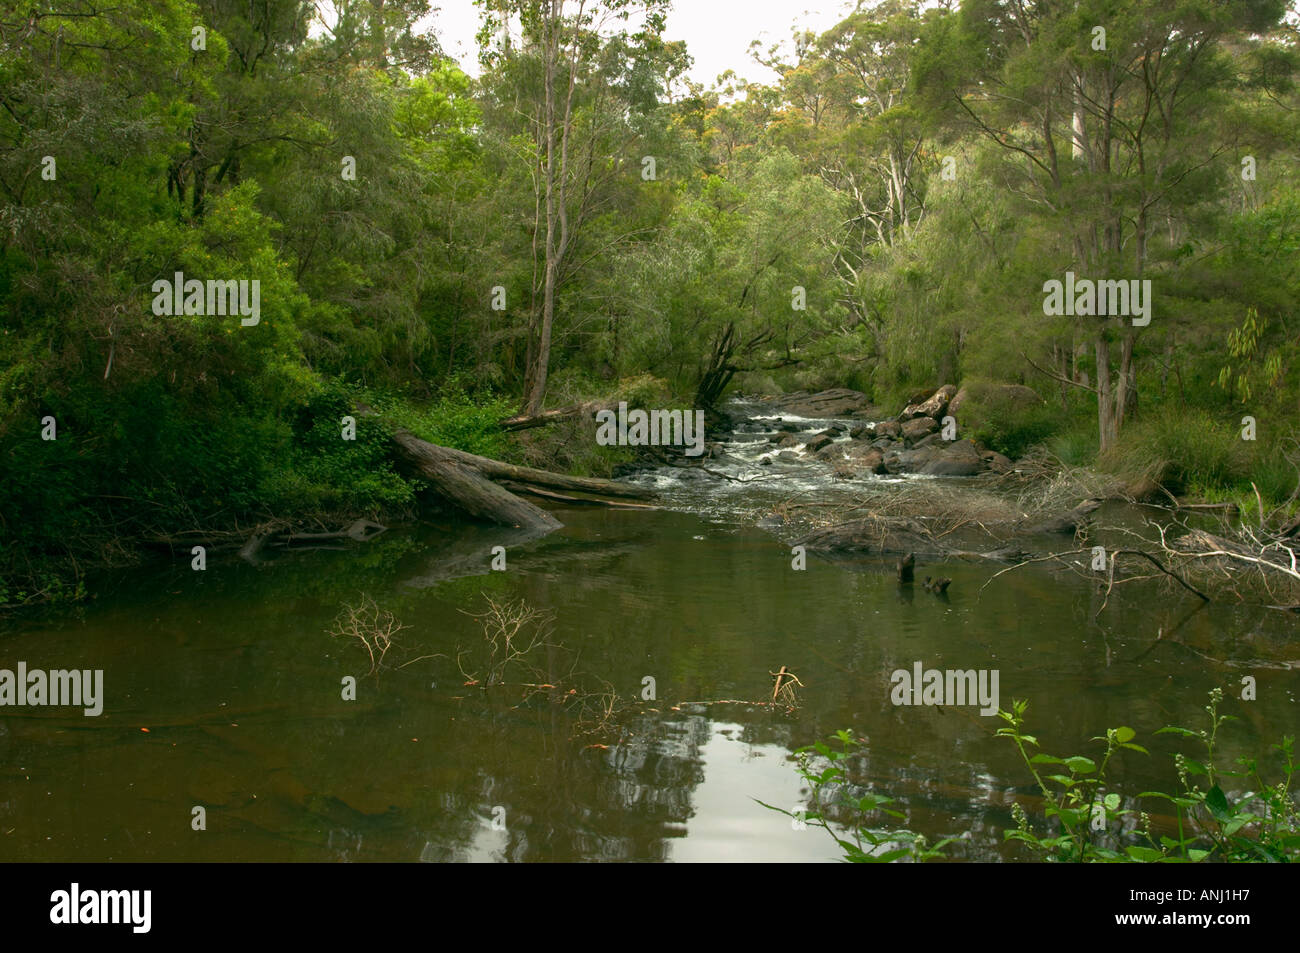 Peaceful and beautiful stream with smooth stones in lush forest. horizontal / landscape orientation. Stock Photo